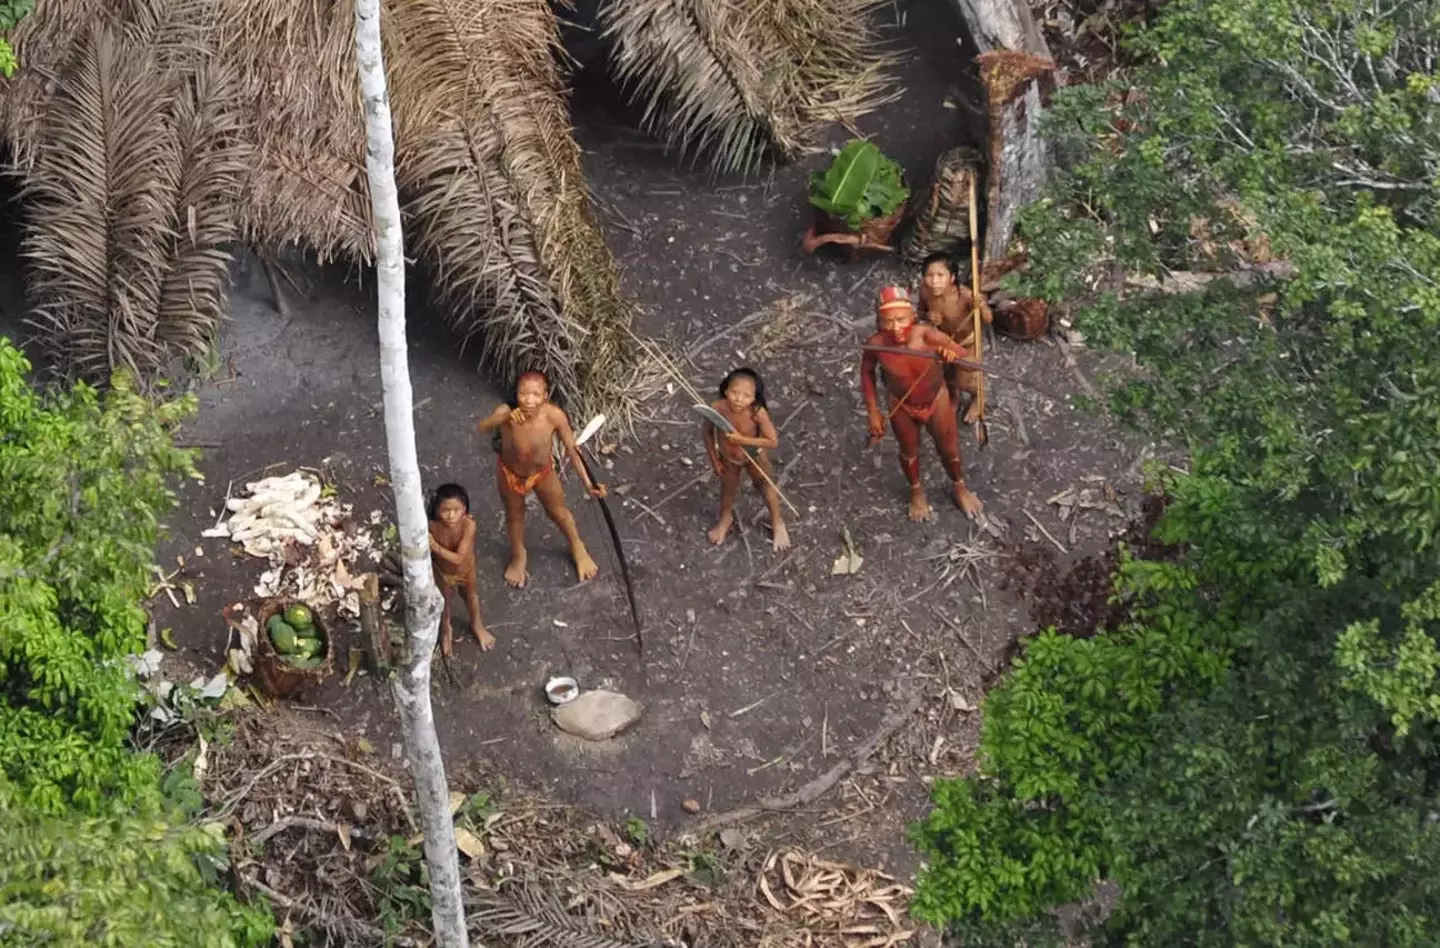 Meirelles also noted how the uncontacted tribes of the region were in danger from illegal loggers in Peru.